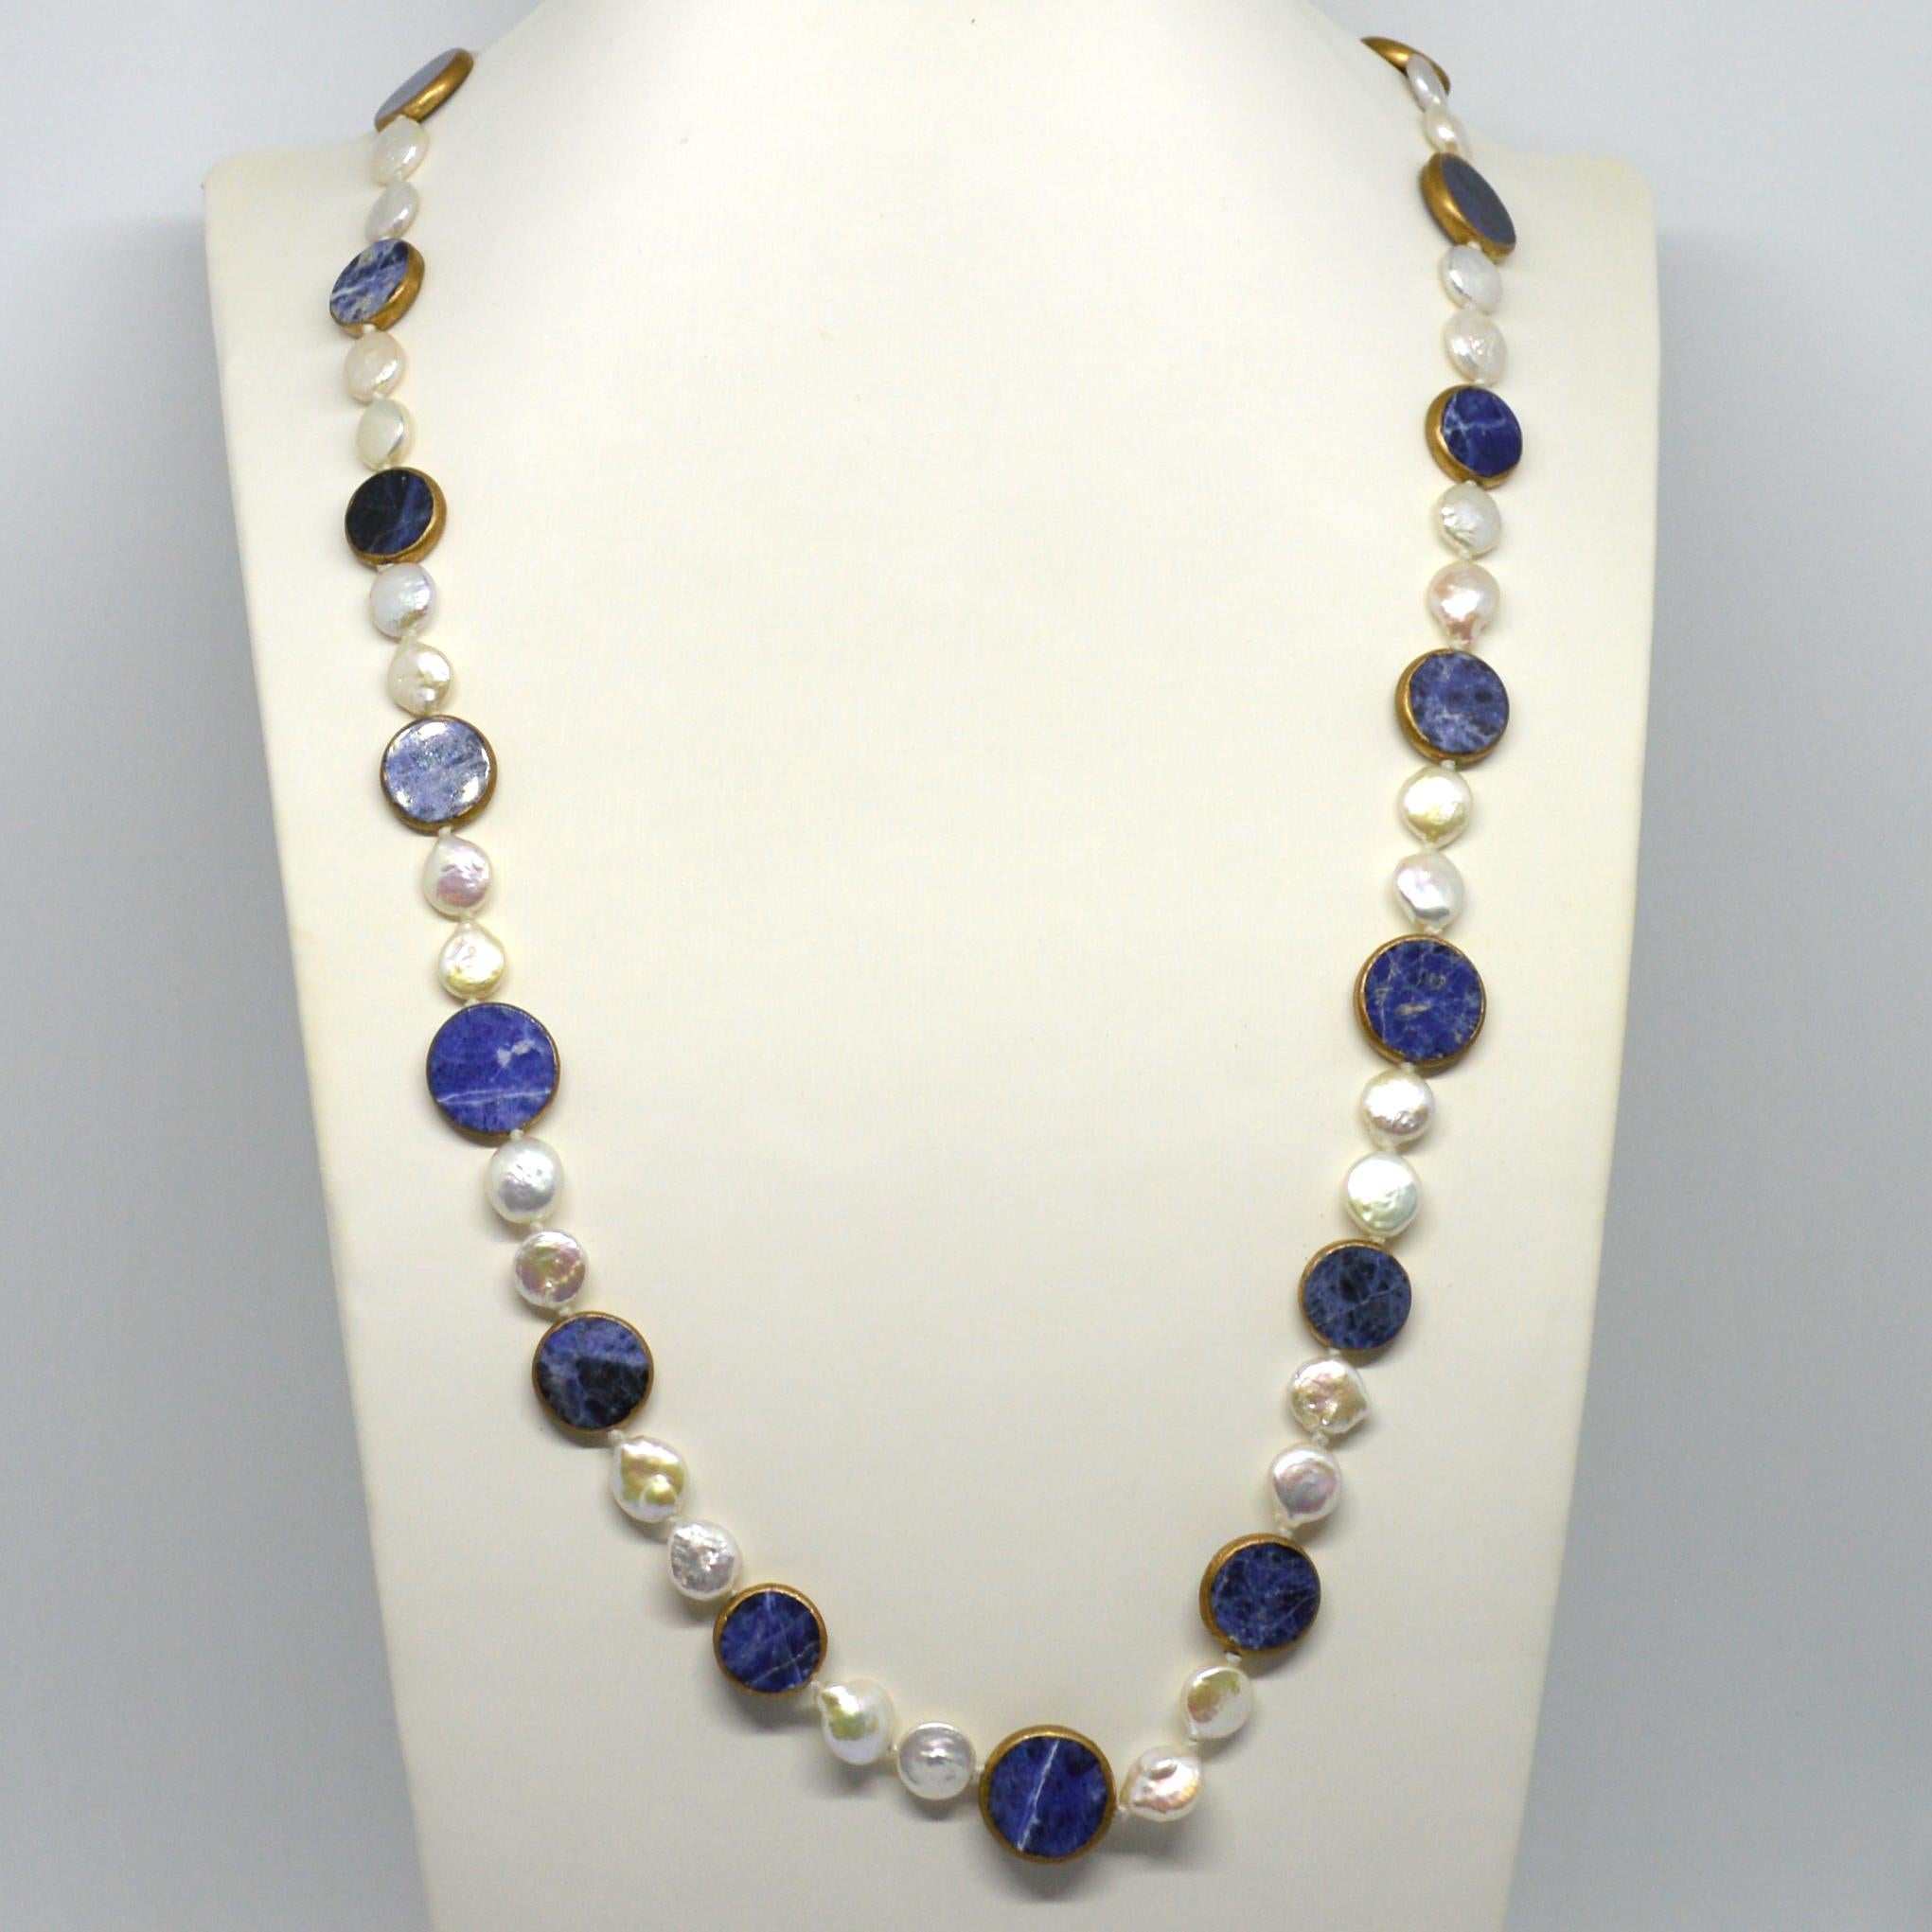  We have included a Pearl shortener so you can wear this Necklace doubled. 

 Description Fresh Water Pearl Coin 10x4mm
                     Sodalite approximatly 14mm and 18mm
                     Fresh Water Pearl and Sodalite is Bezel Set with